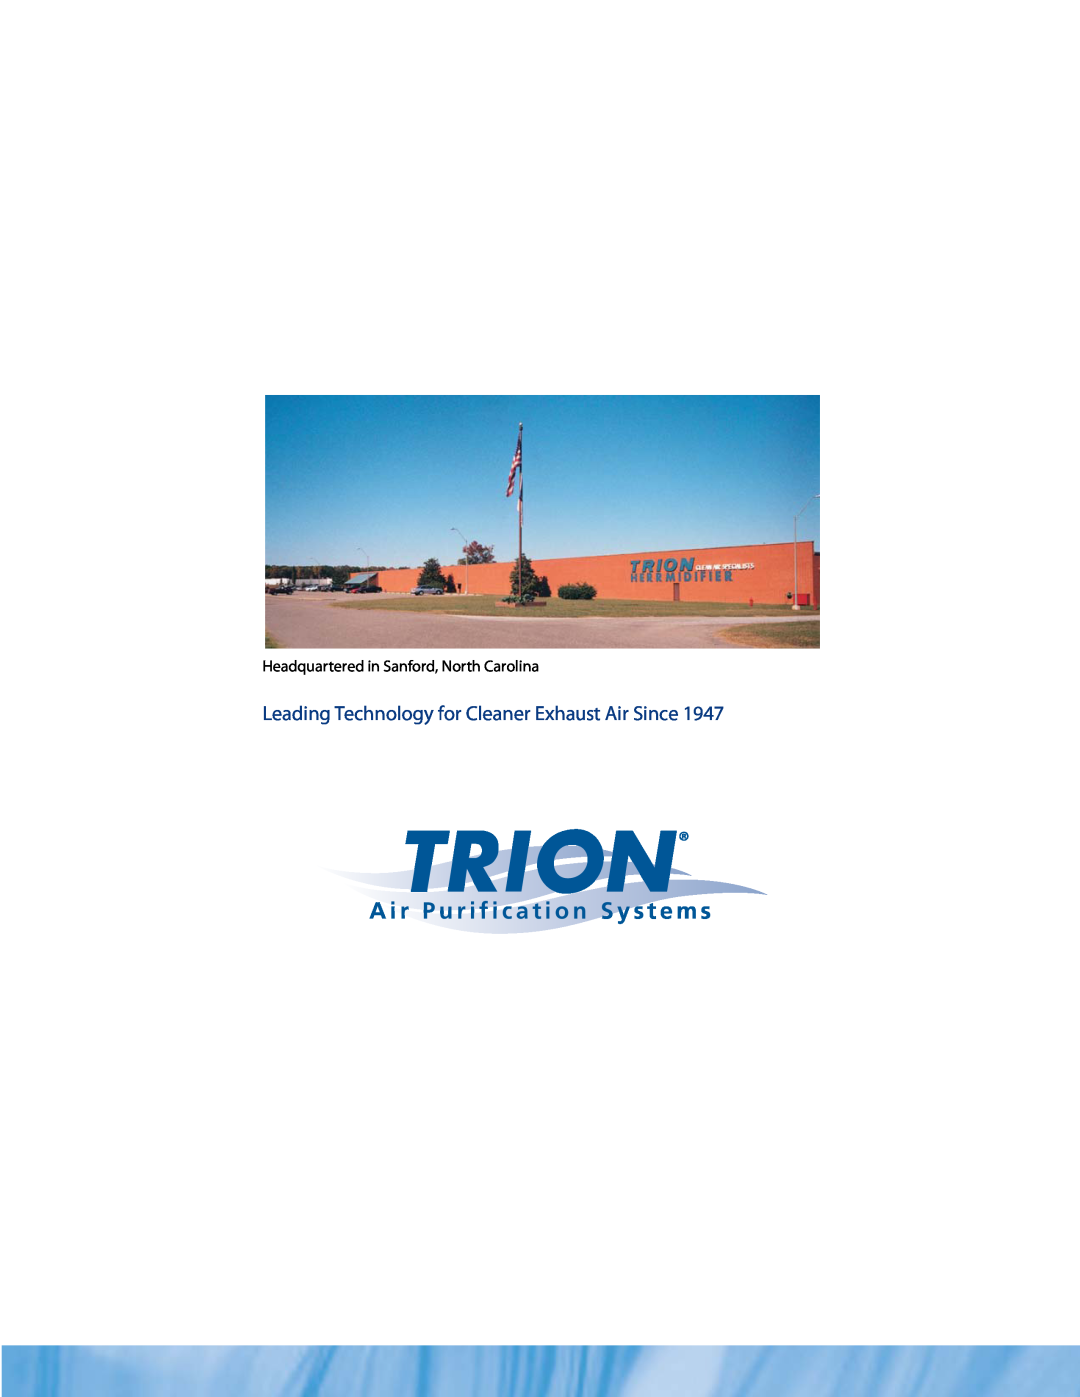 Trion CA3000C, CA6000C manual Leading Technology for Cleaner Exhaust Air Since, A i r P u r i f i c a t i o n S y s t e m s 